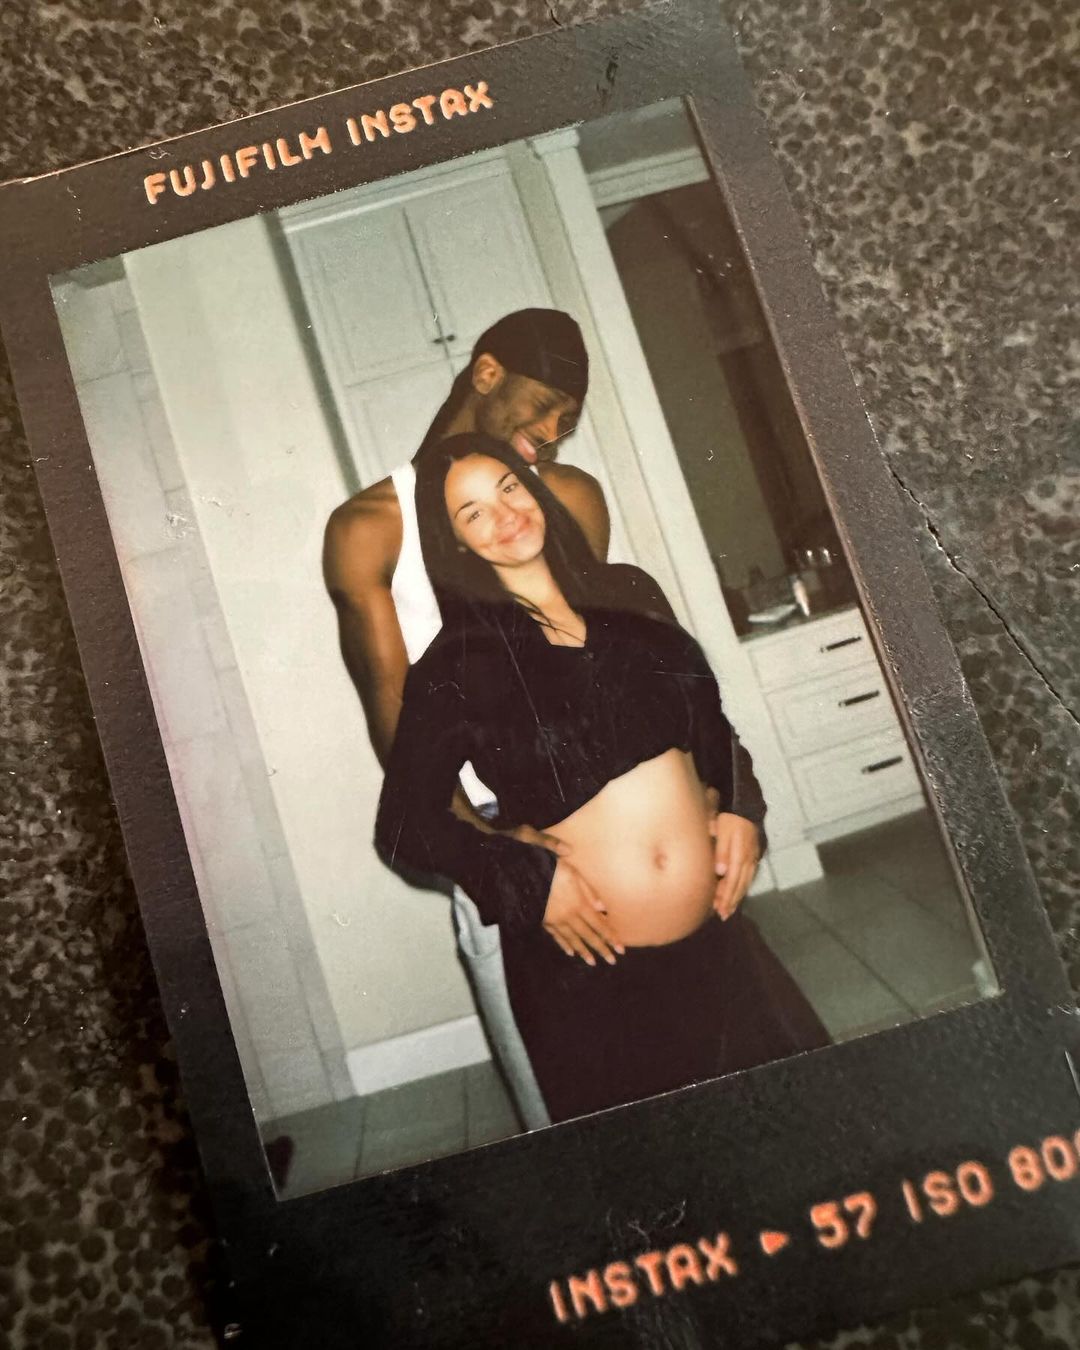 NEW SGA! Famous NBA Player Shai Gilgeous-Alexander and His Fiancée Hailey Are Anticipating Their First Chιld Together